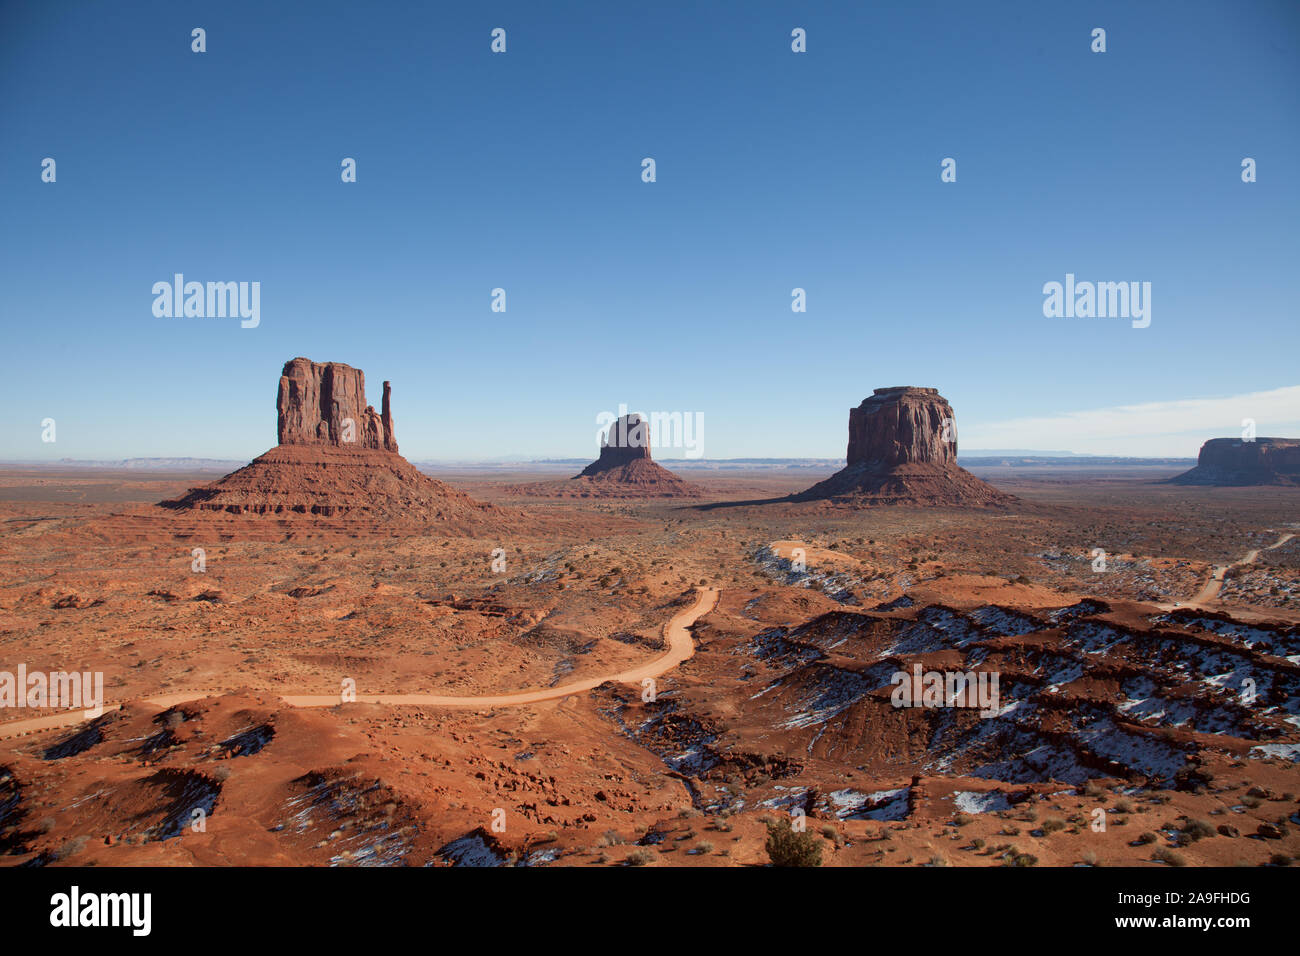 The famous rock formations of Monument Valley, Utah Stock Photo